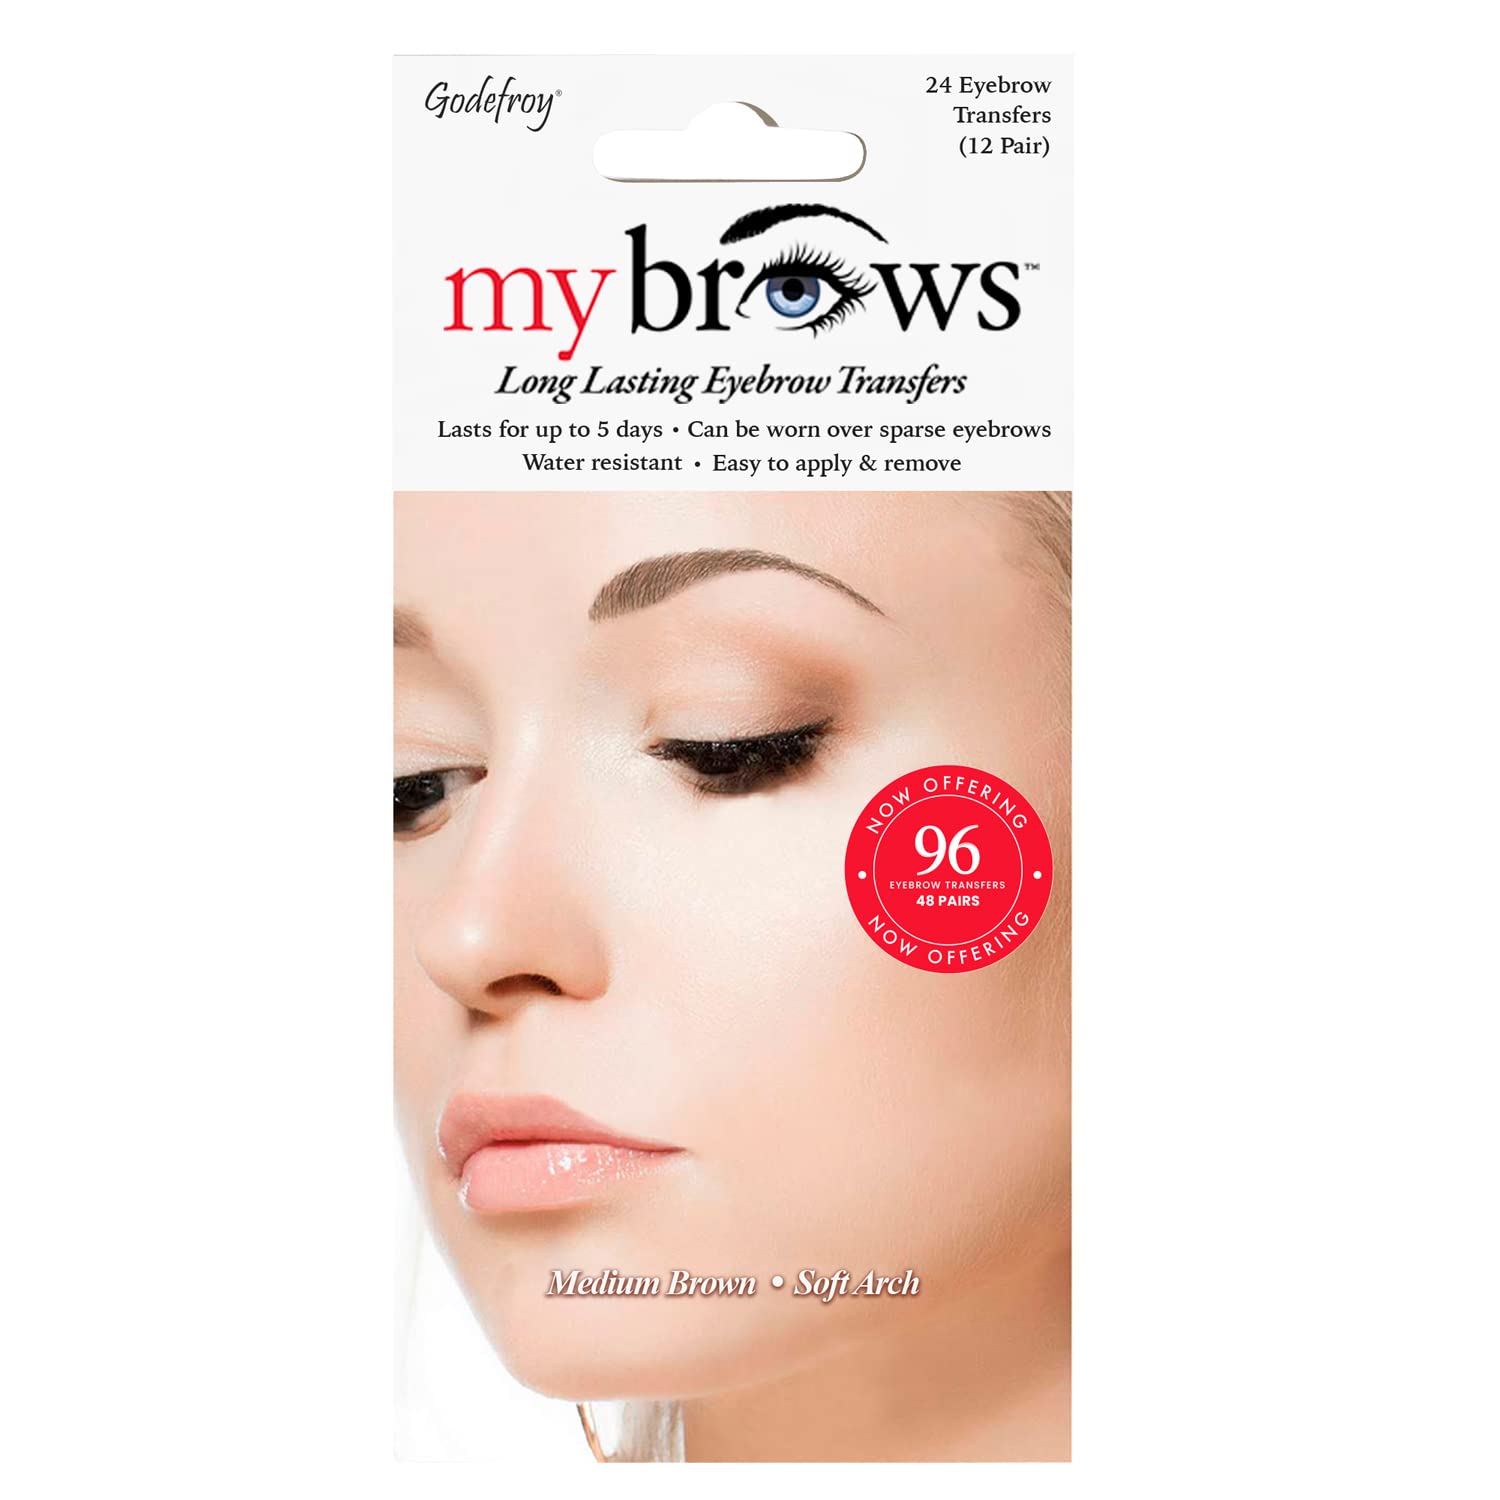 Godefroy MyBrows Long Lasting Eyebrow Transfers, Soft Arch, Medium Brown, 48-Pairs of Brows (96 Individual transfers)